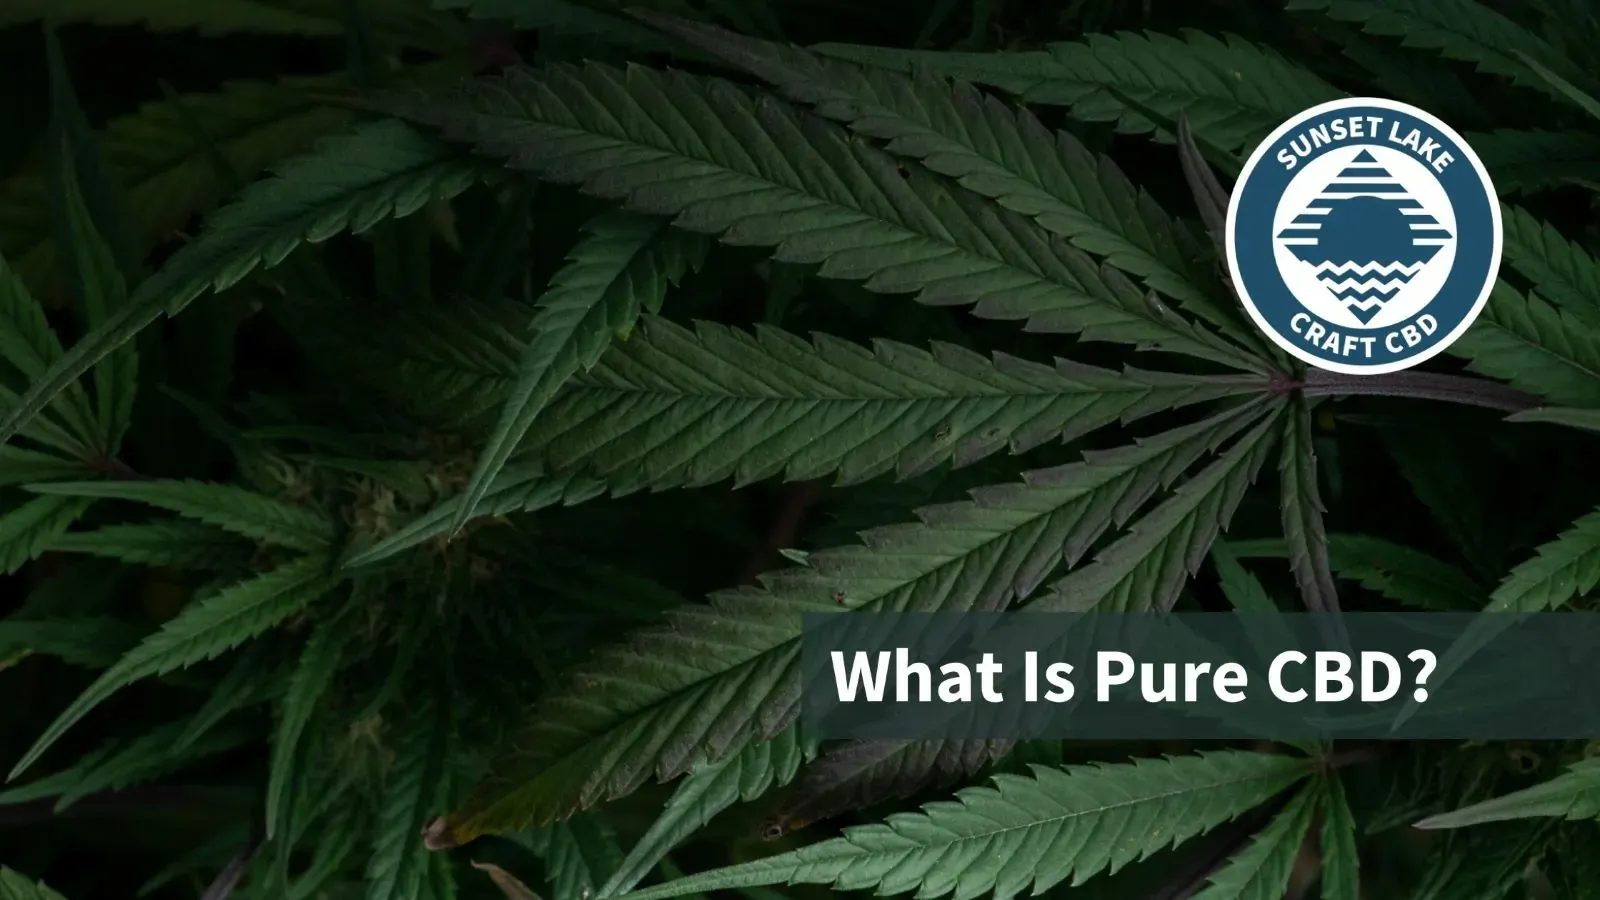 Hemp water leaves with the text "What is Pure CBD?"